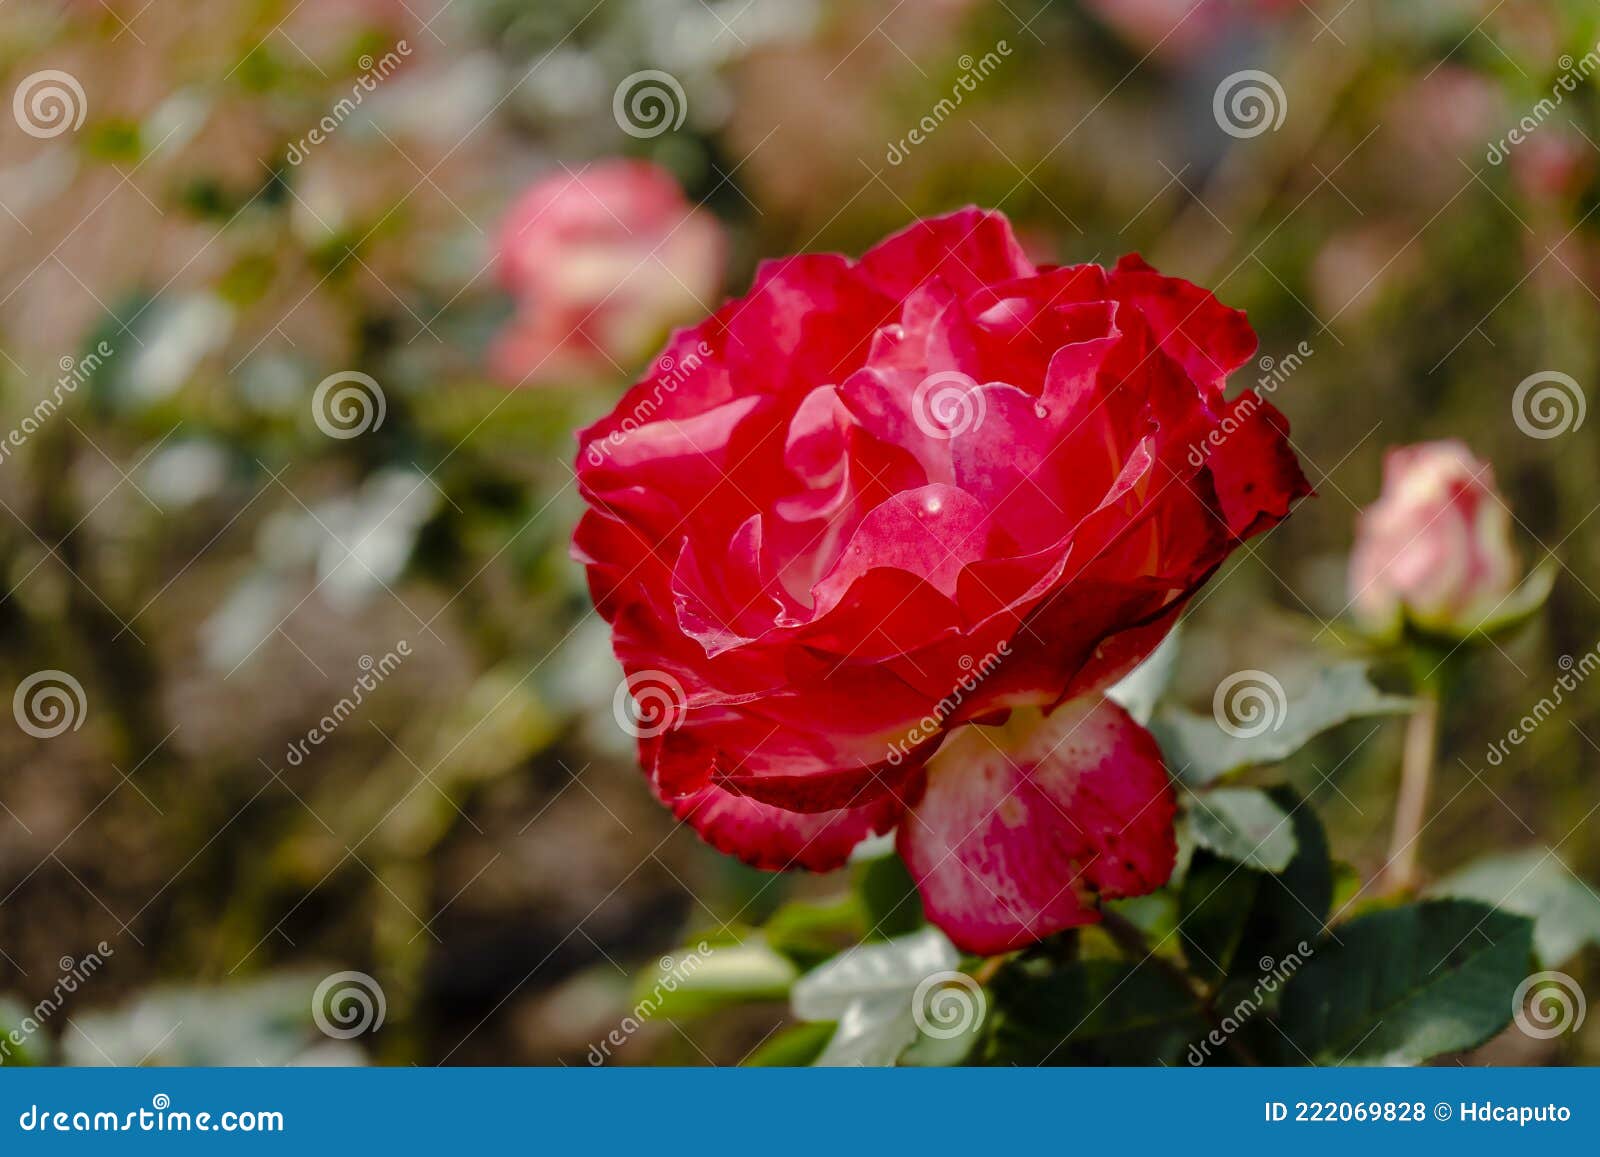 variety the prince of red rose grown in the rose garden of palermo in buenos aires